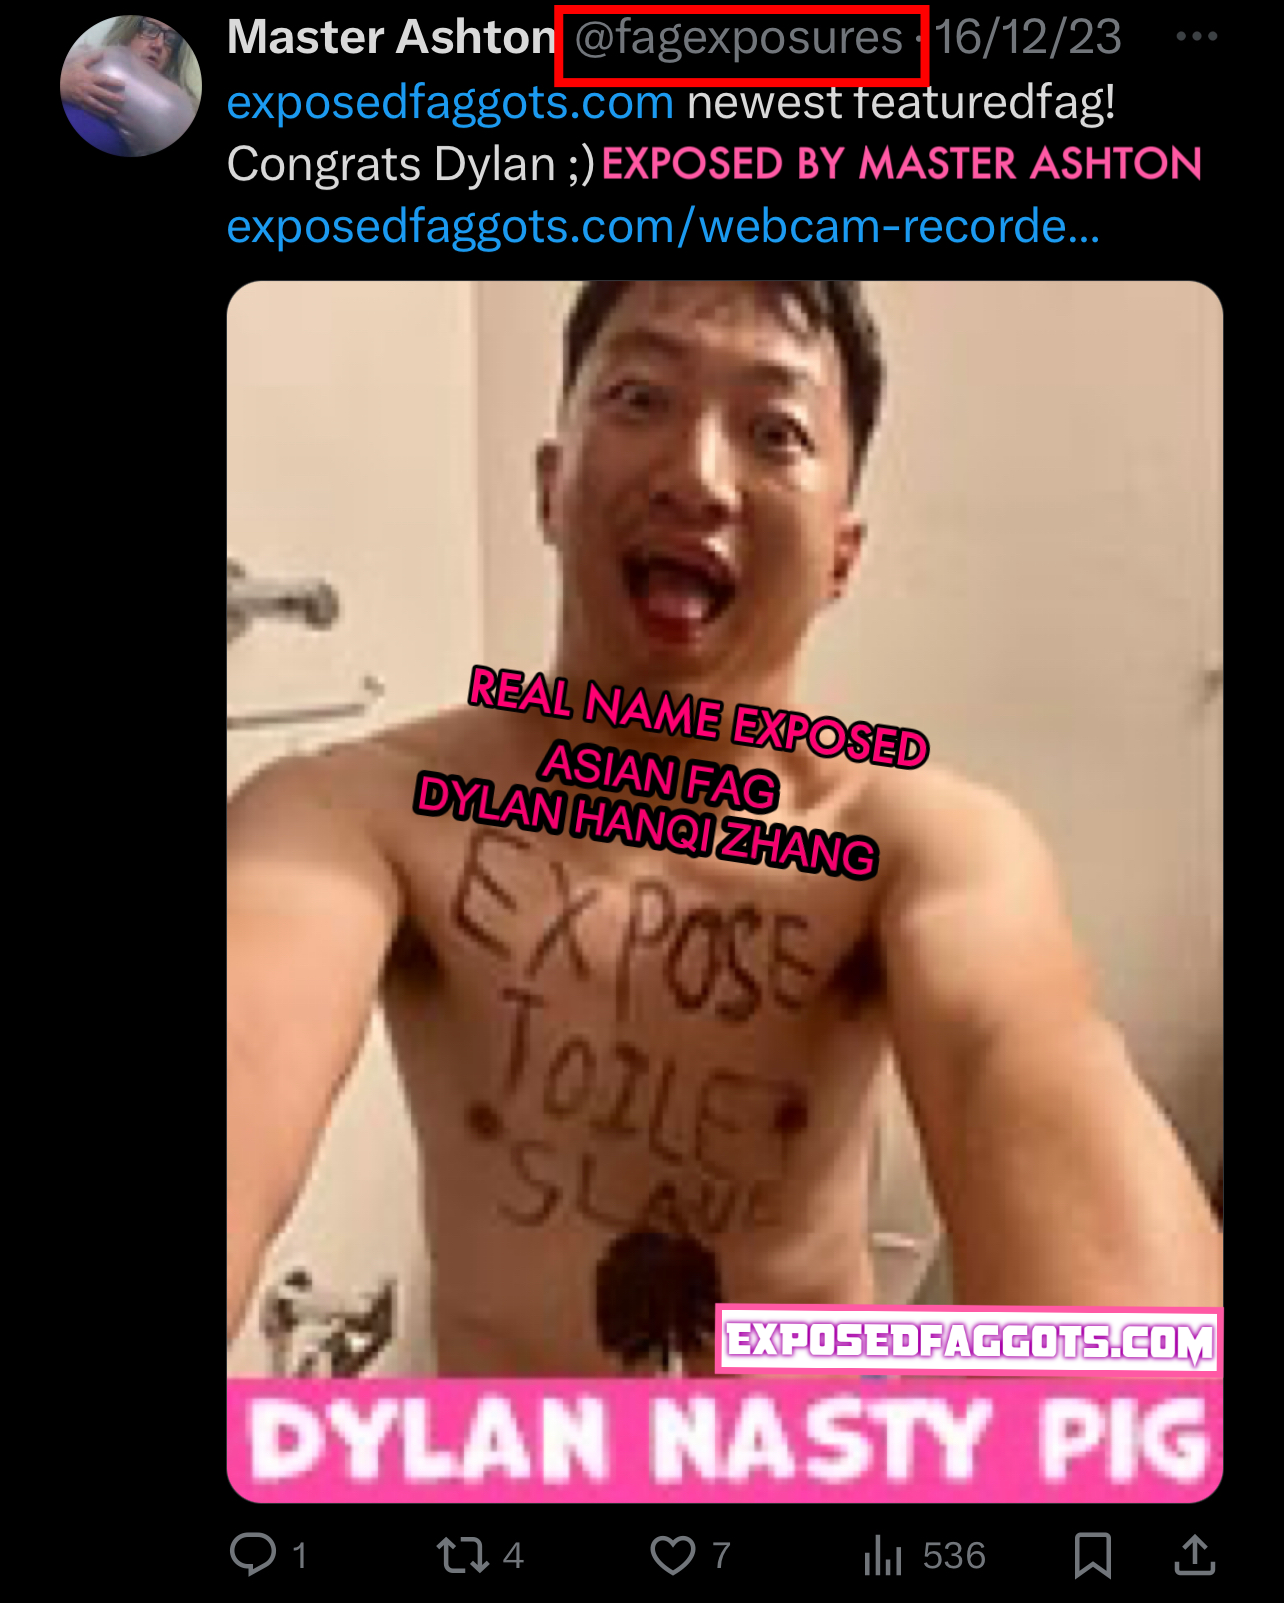 PERMANENTLY EXPOSED ASIAN FAG DYLAN HANQI ZHANG